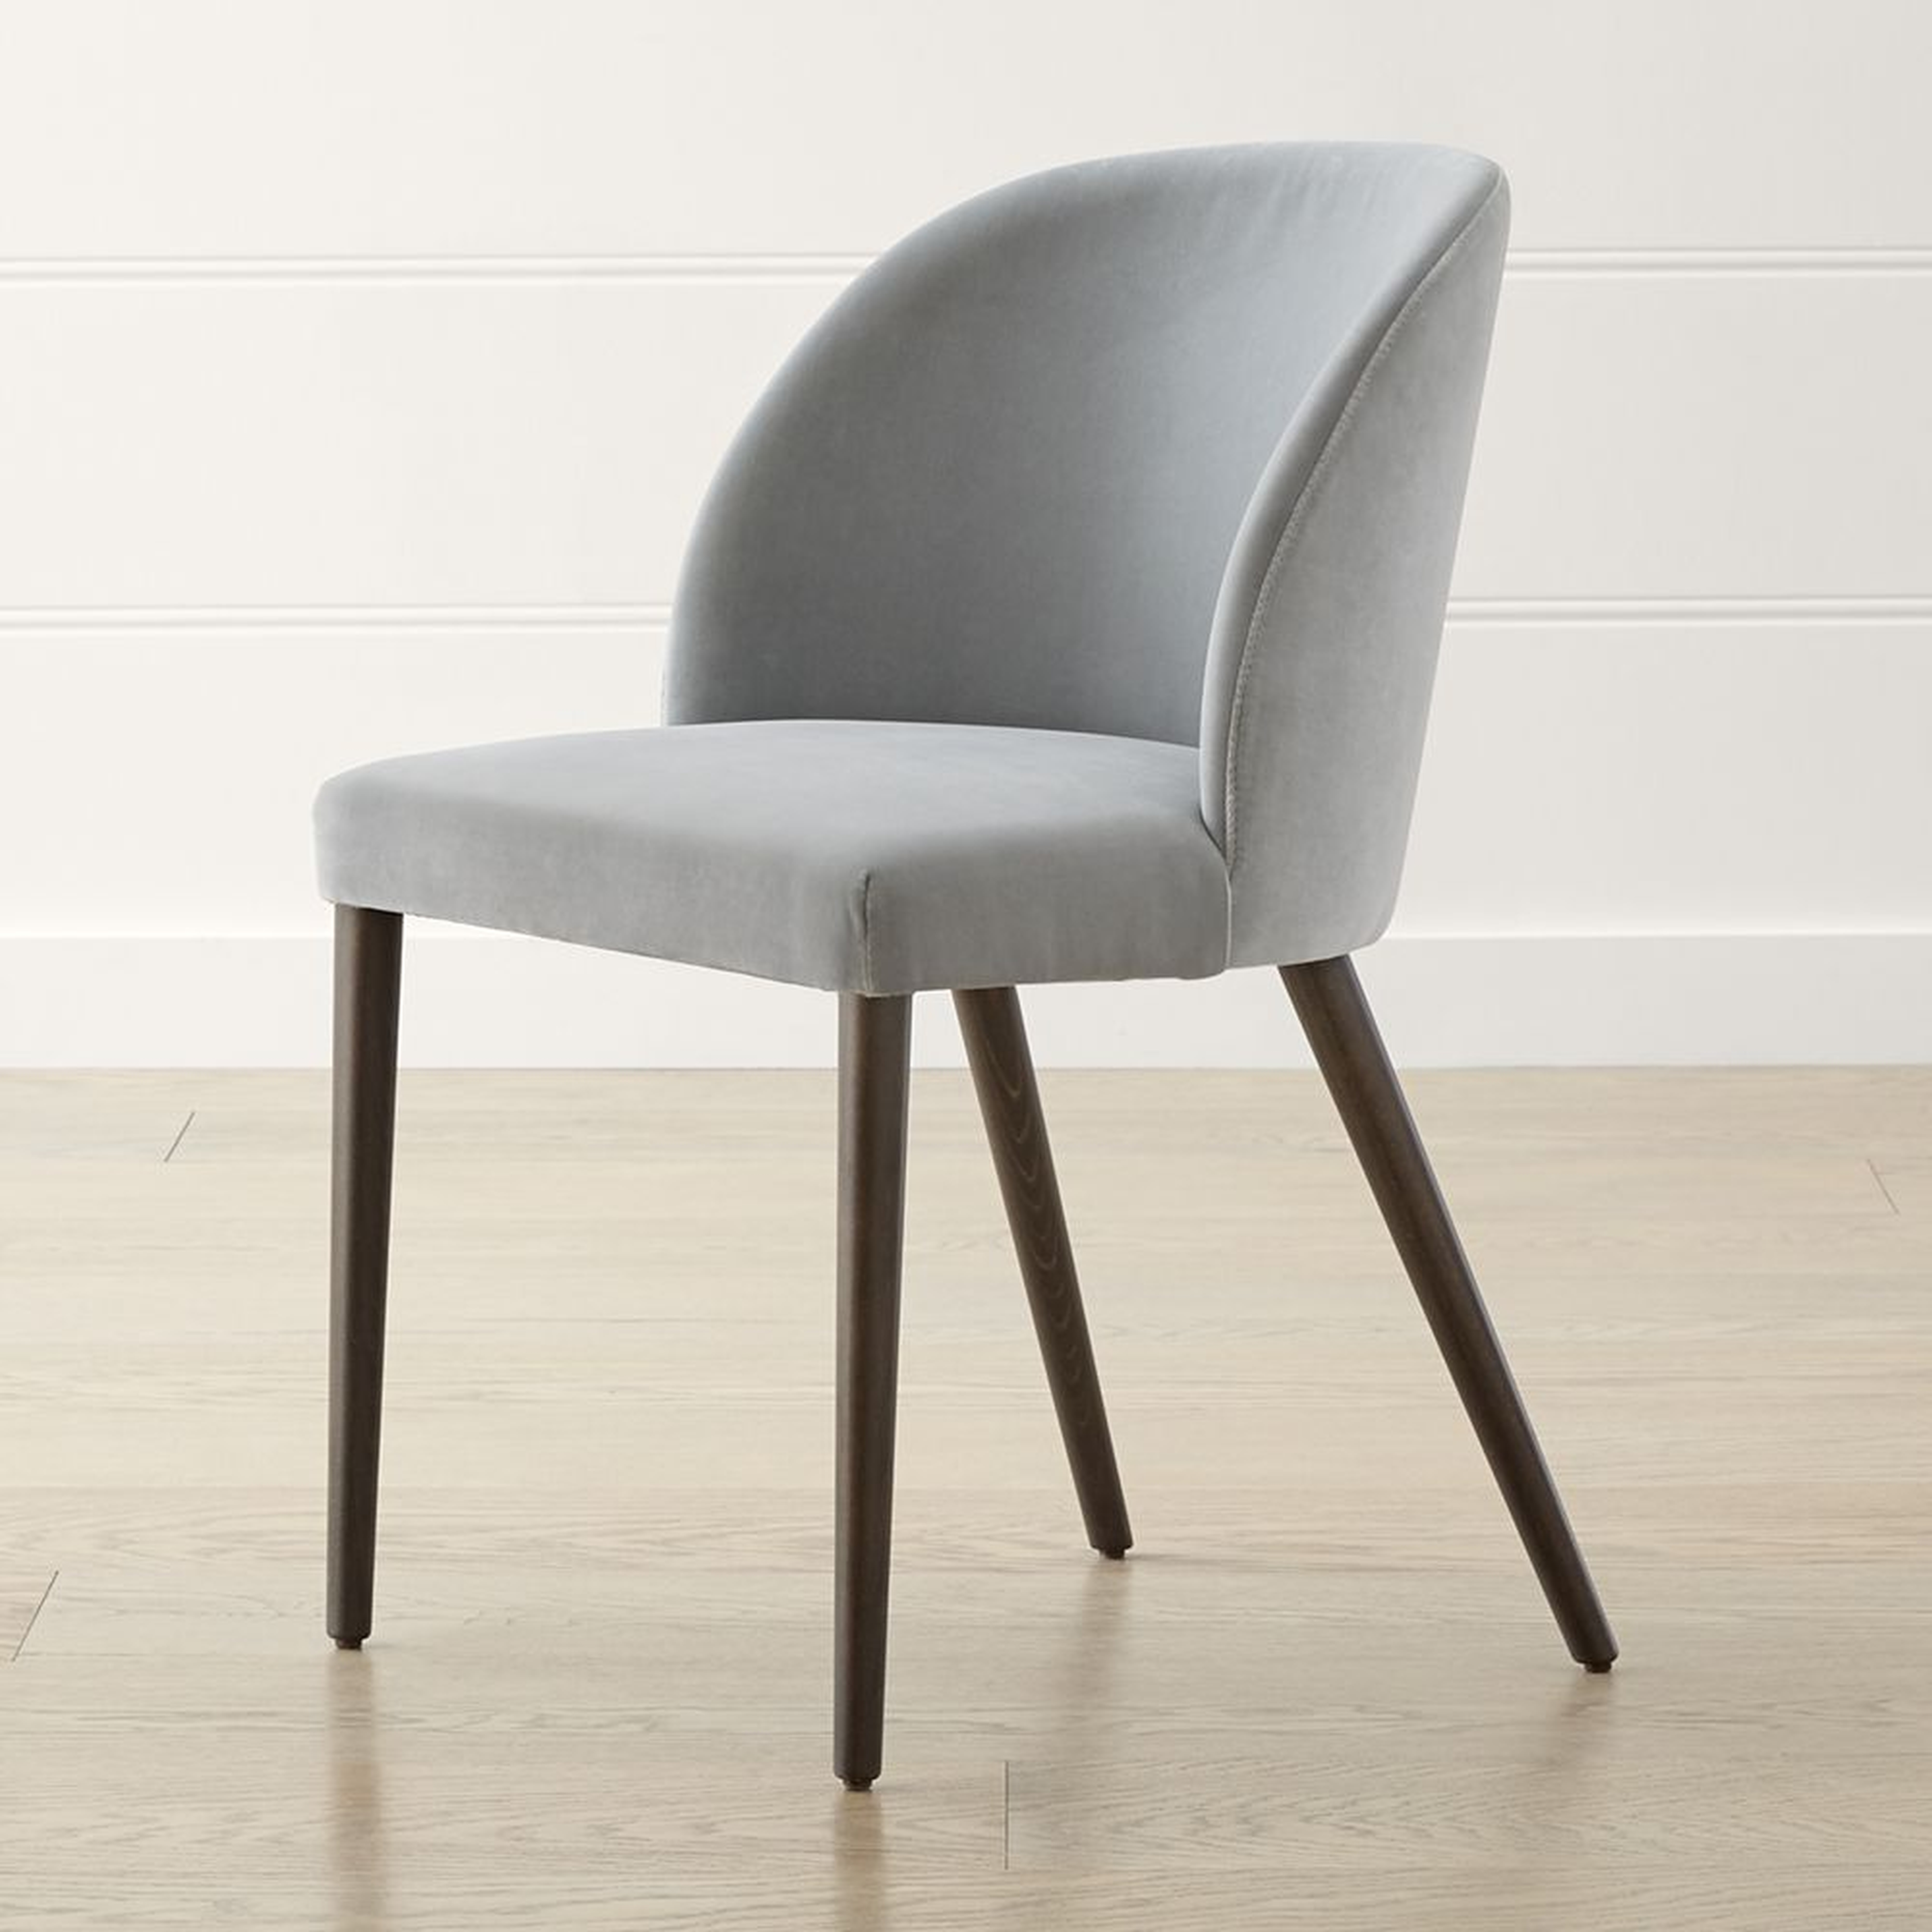 Camille Mist Italian Dining Chair - Crate and Barrel